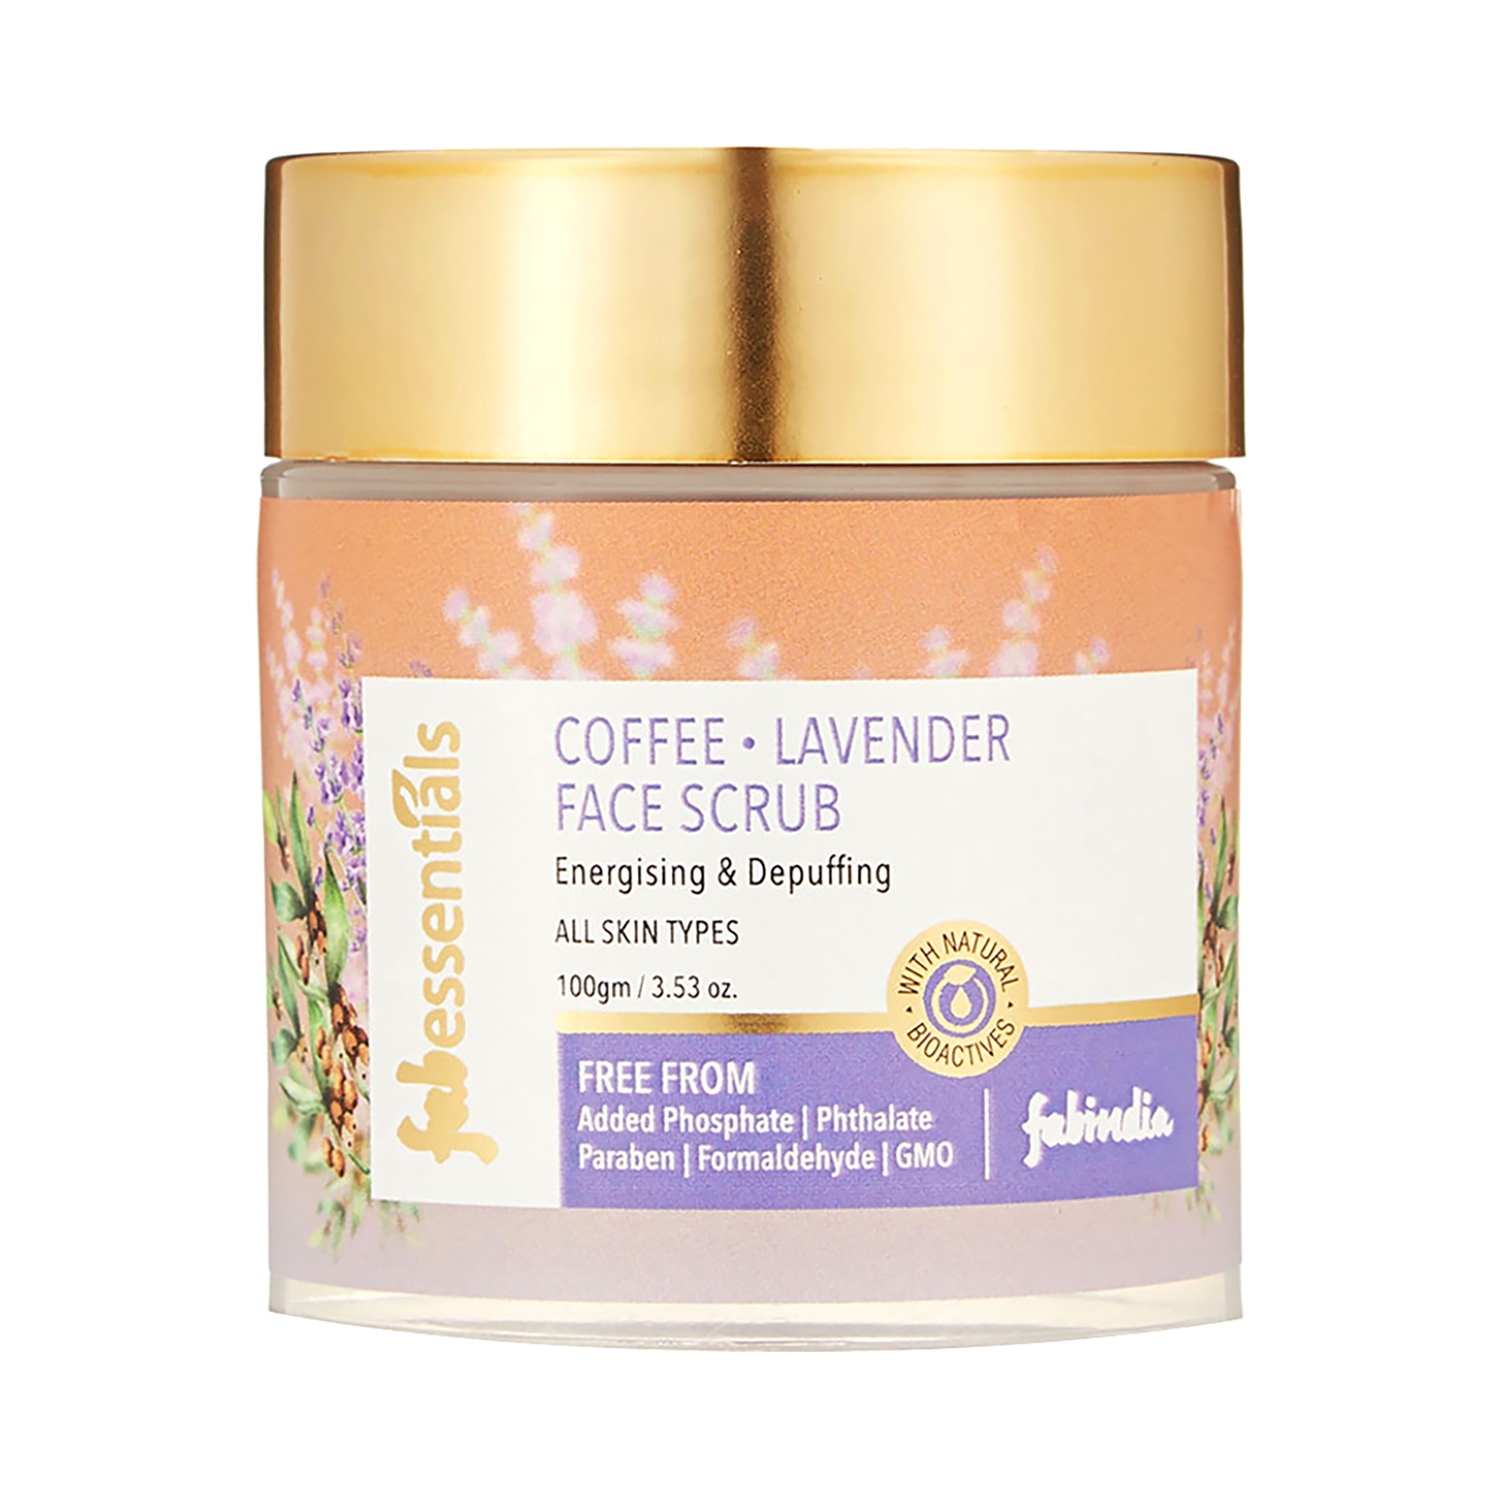 Fabessentials by Fabindia | Fabessentials by Fabindia Coffee Lavender Face Scrub (100g)